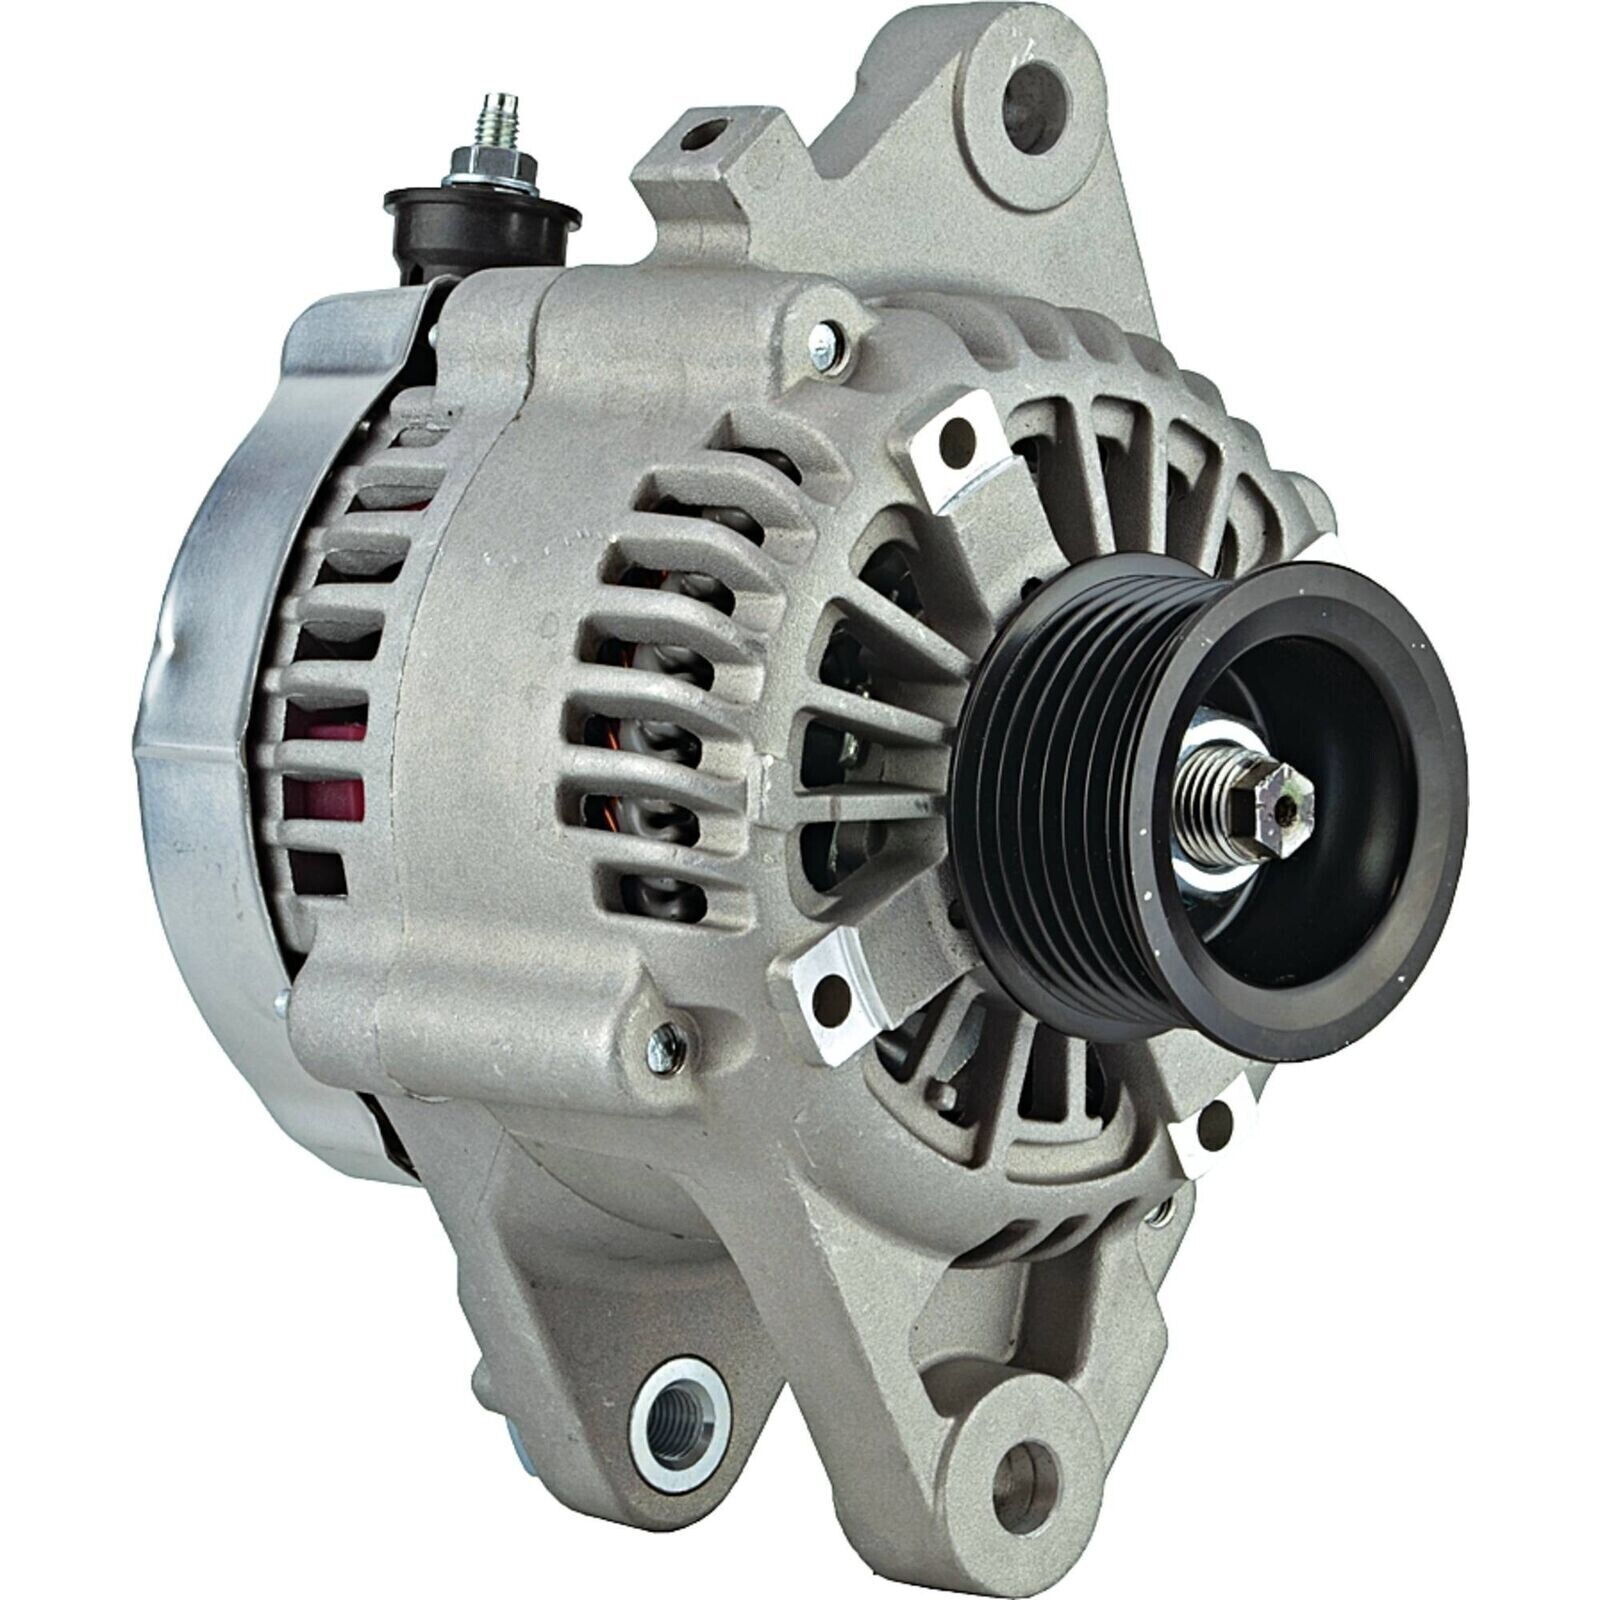 Remanufactured Alternator For 2.7L Toyota Tacoma Pickup Truck 2005-2007 11194A